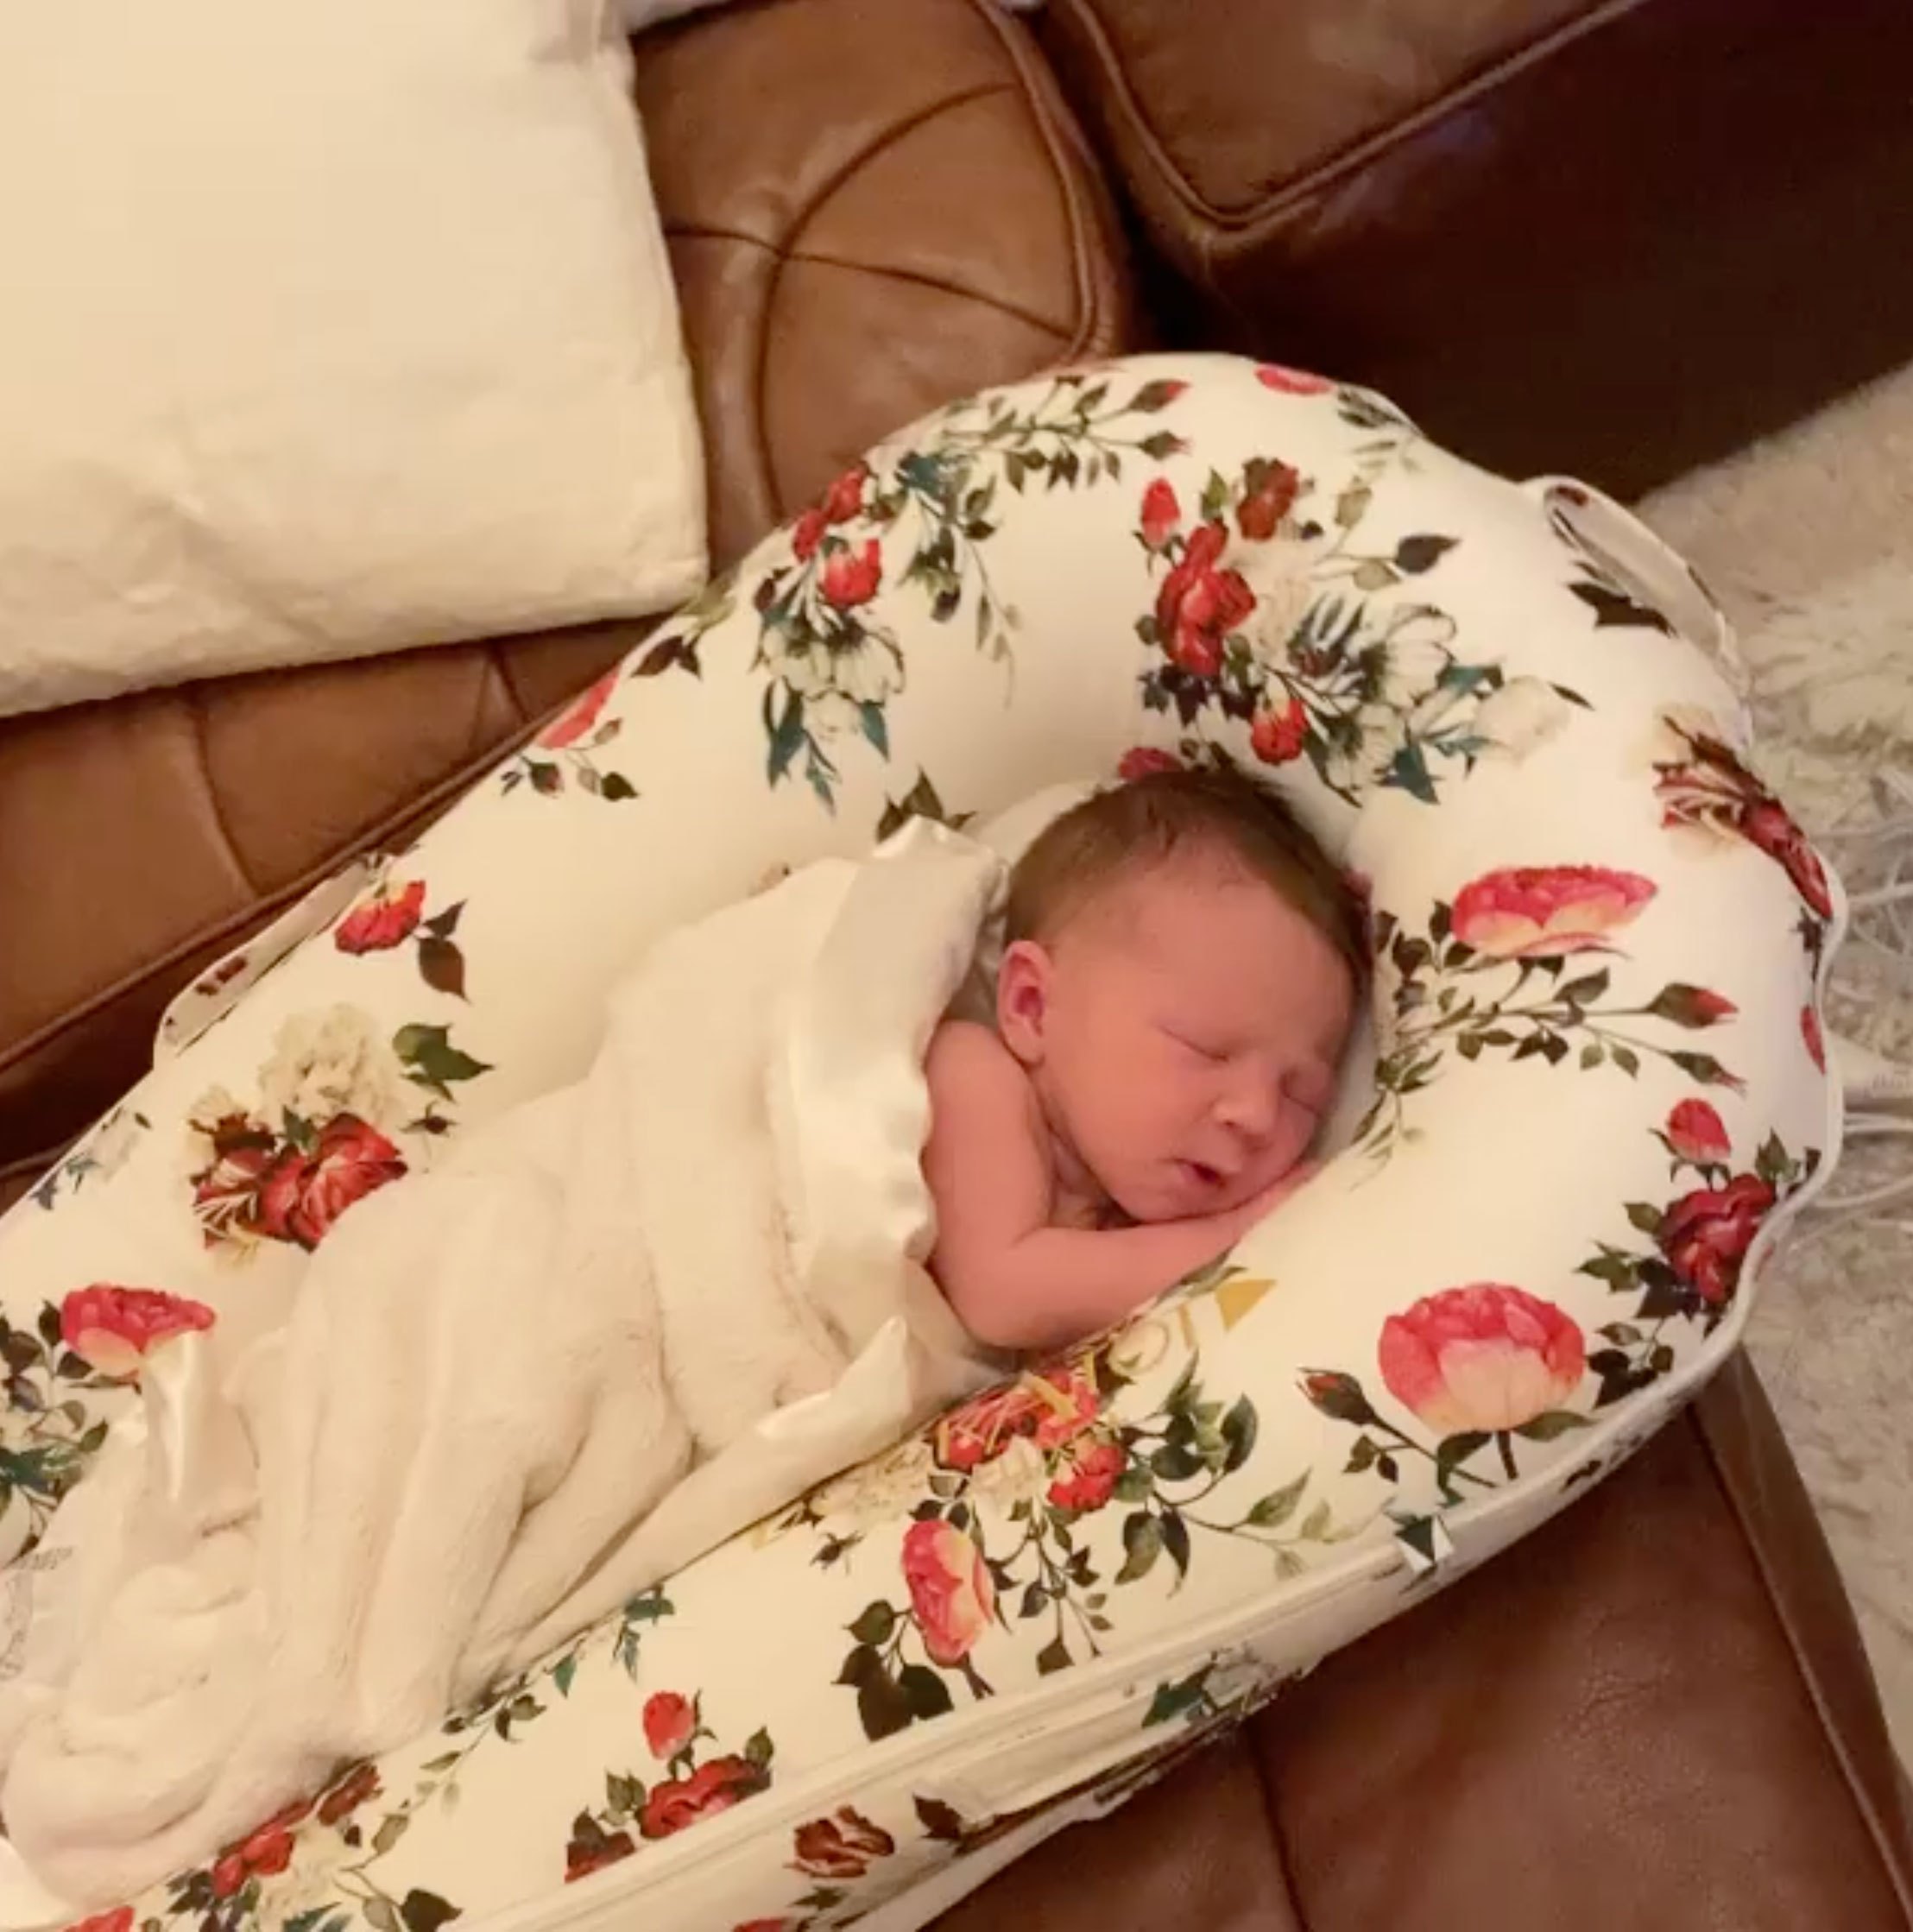 Stassi Schroeder shares a video of daughter Hartford on a pillow.